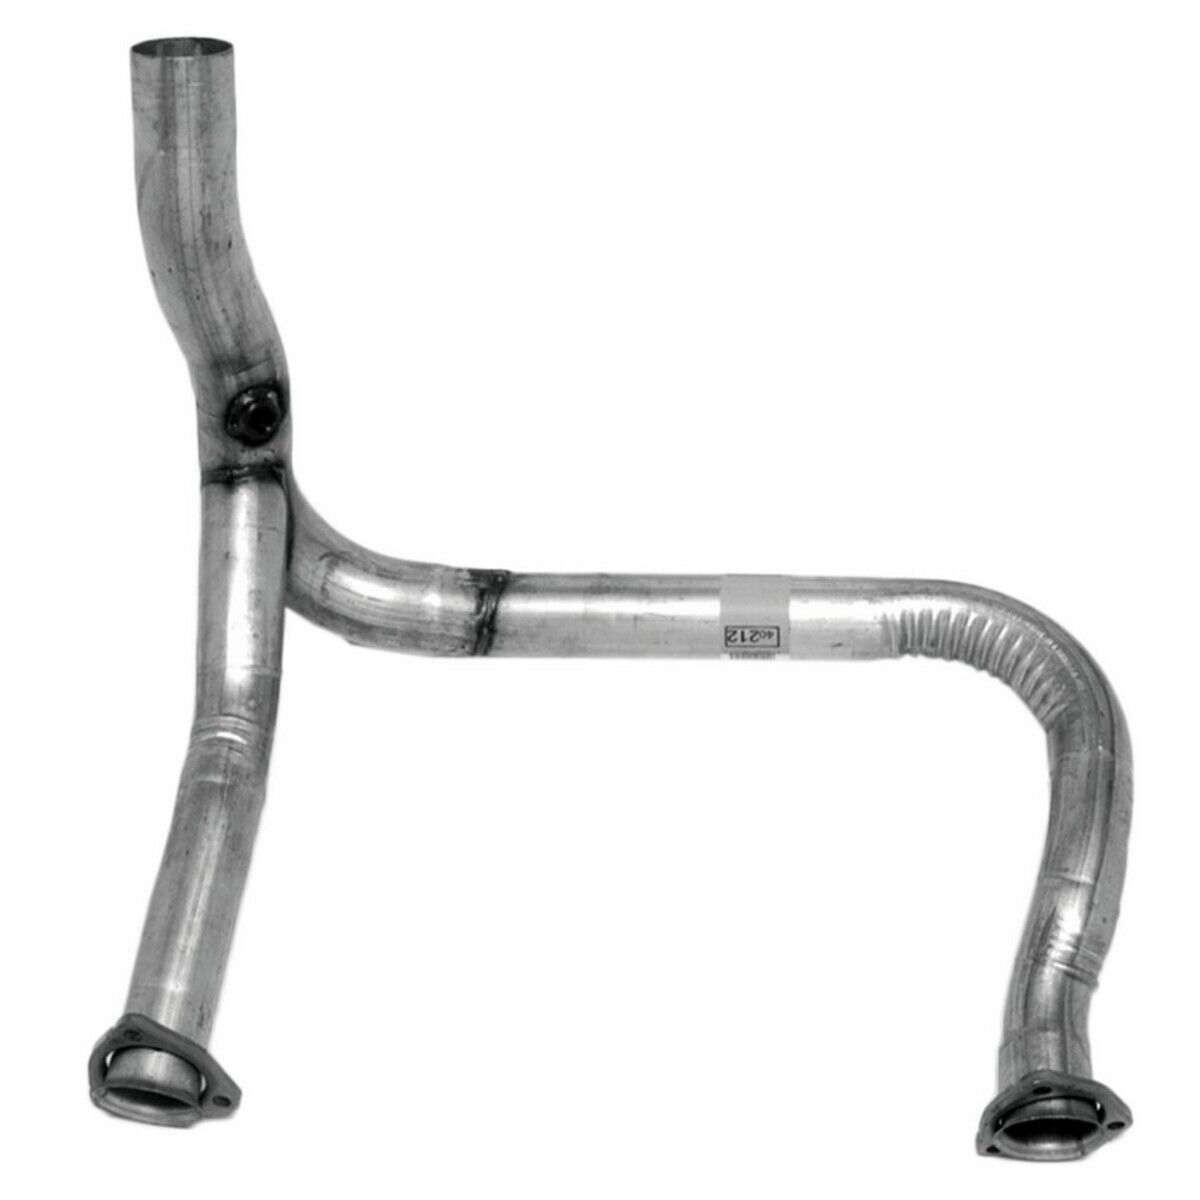 40212 Walker Exhaust Pipe for Chevy S10 Pickup S-10 BLAZER S15 Jimmy Chevrolet